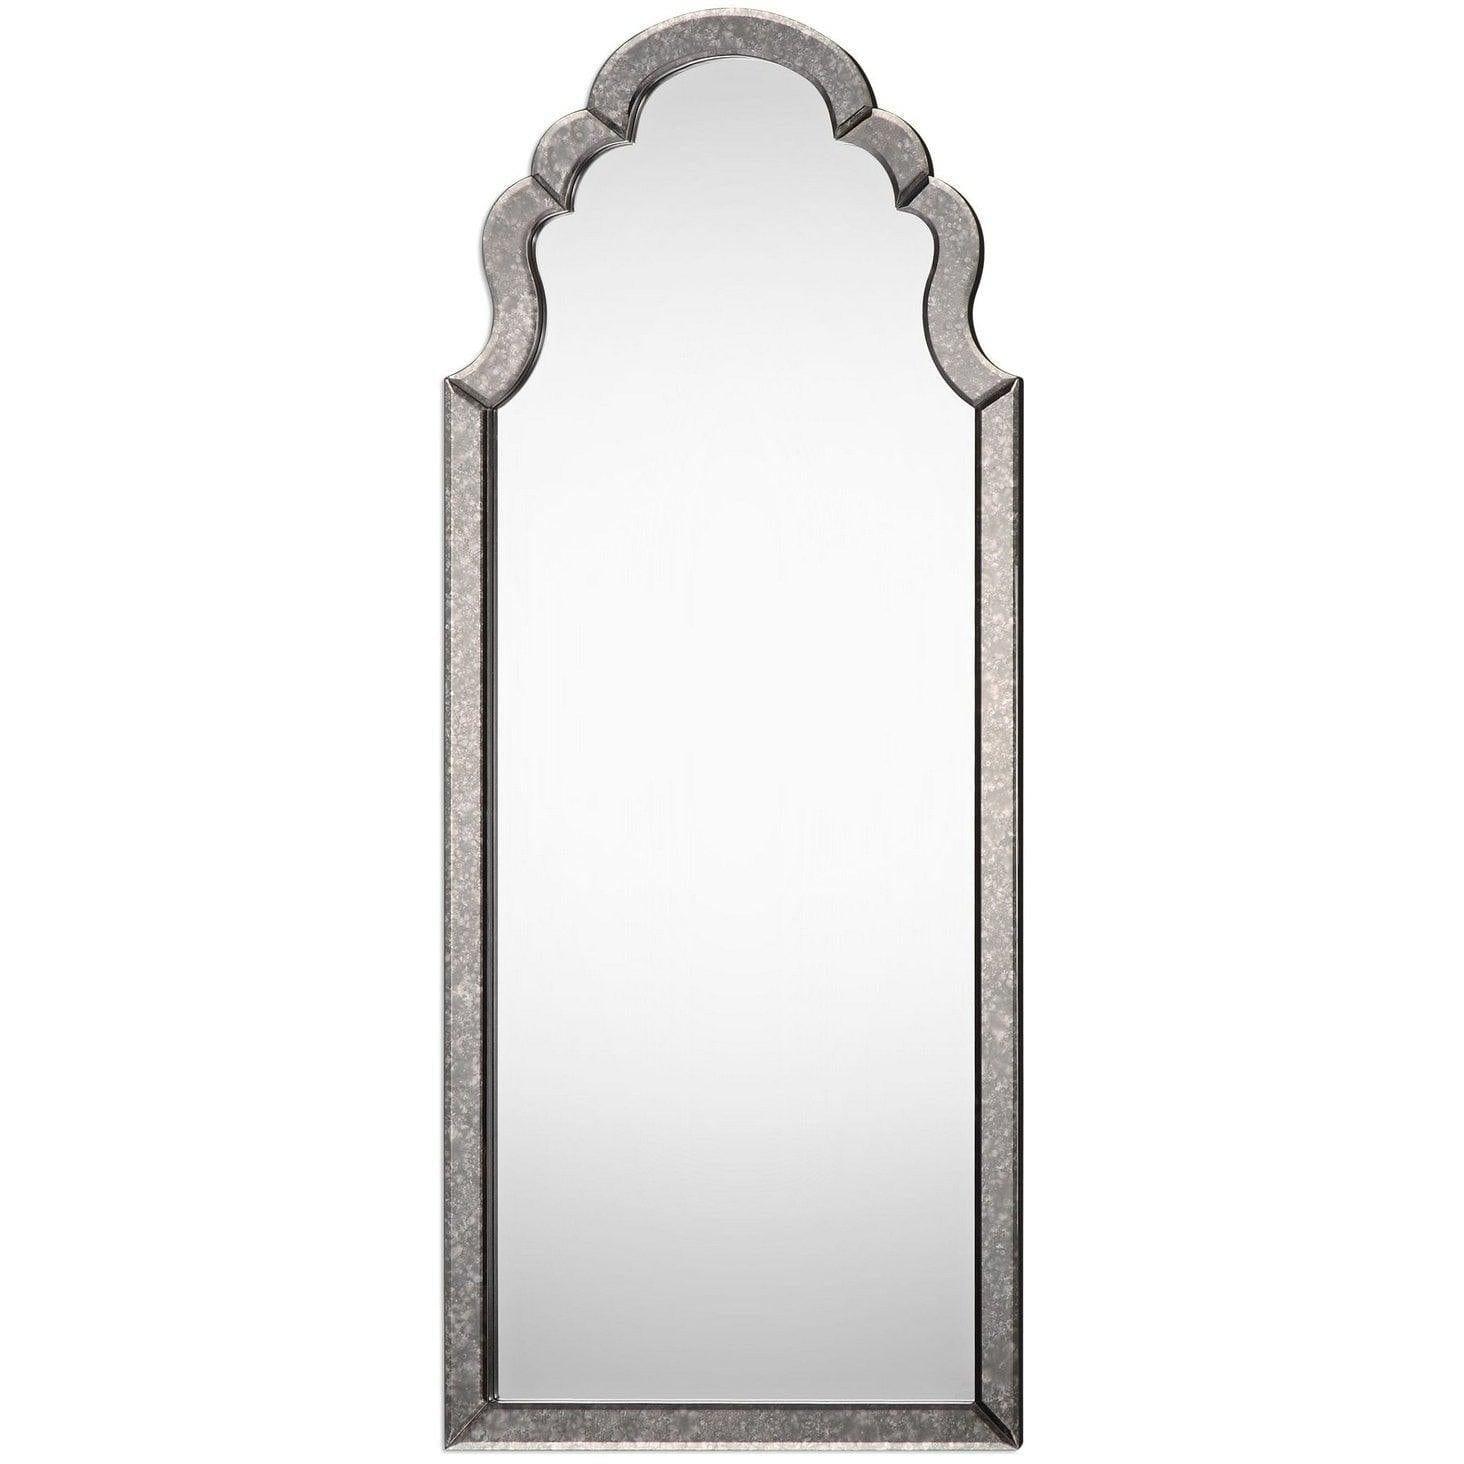 The Uttermost - Lunel Mirror - 09037 | Montreal Lighting & Hardware